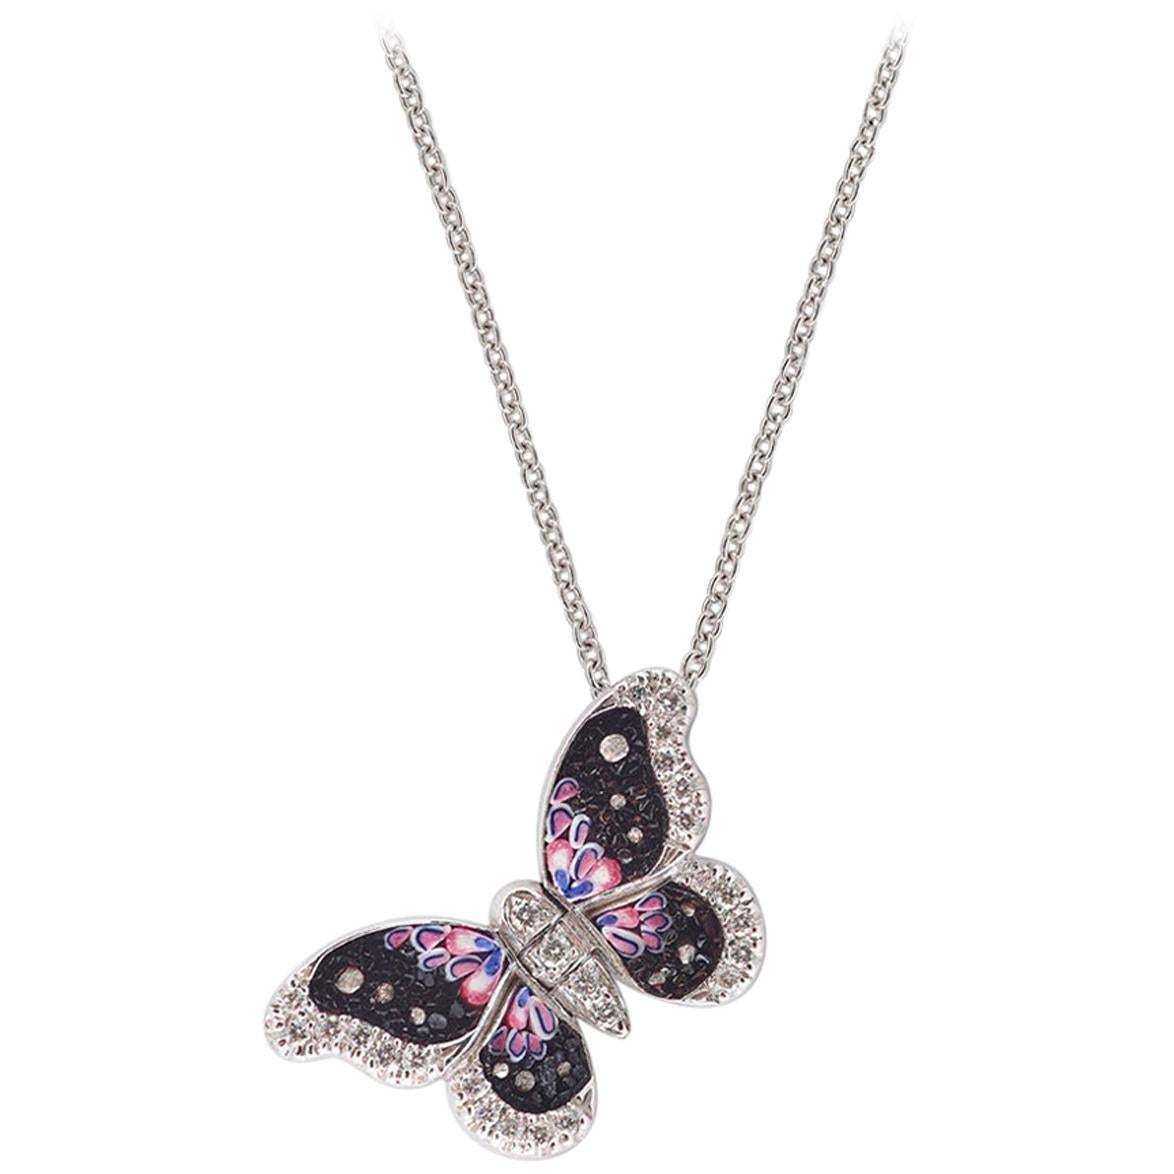 Stylish Necklace White Gold White Diamonds Hand Decorated with Micro Mosaic For Sale